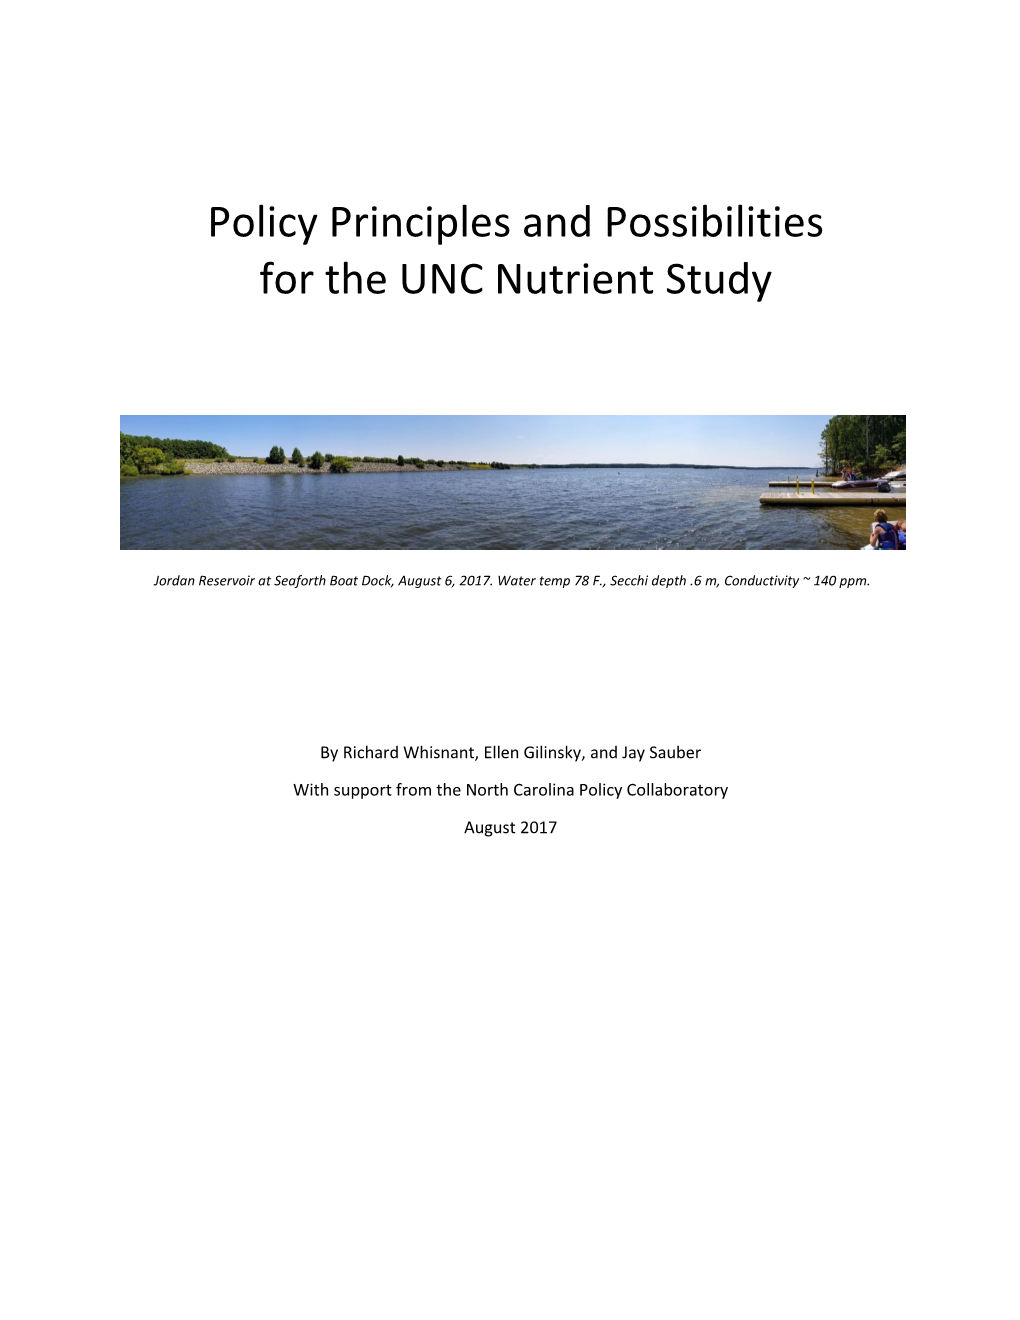 Policy Principles and Possibilities for the UNC Nutrient Study